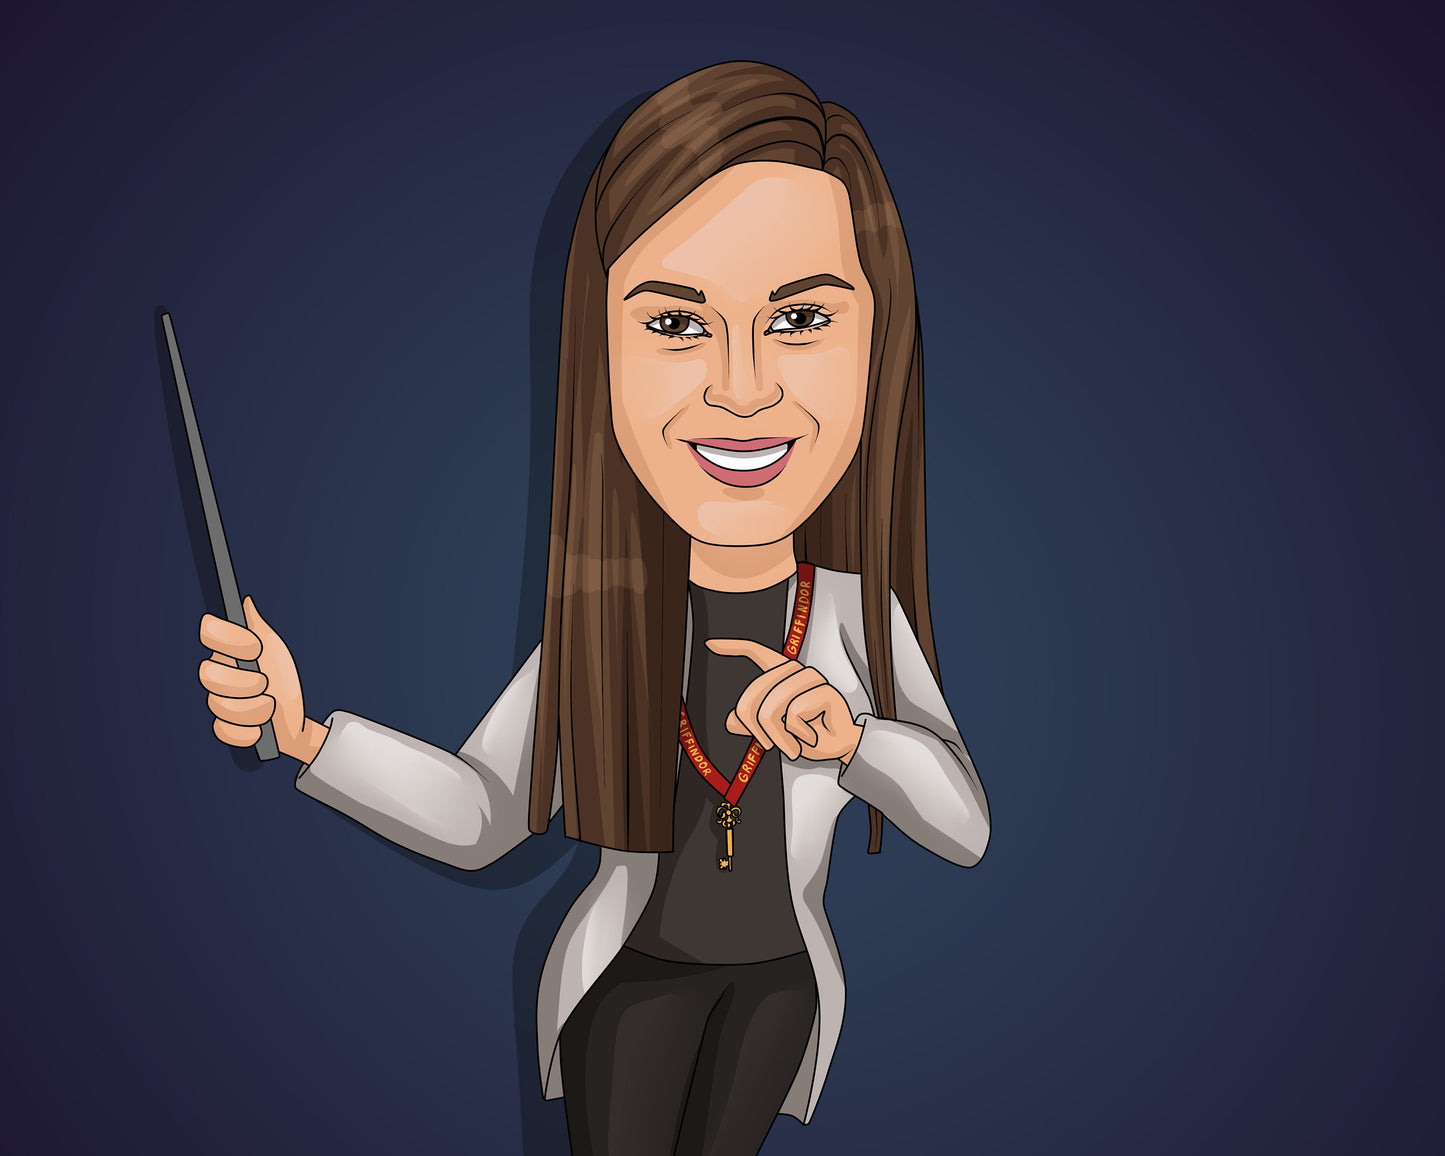 Conductor Gift - Custom Caricature From Photo/choir director gift/music conductor